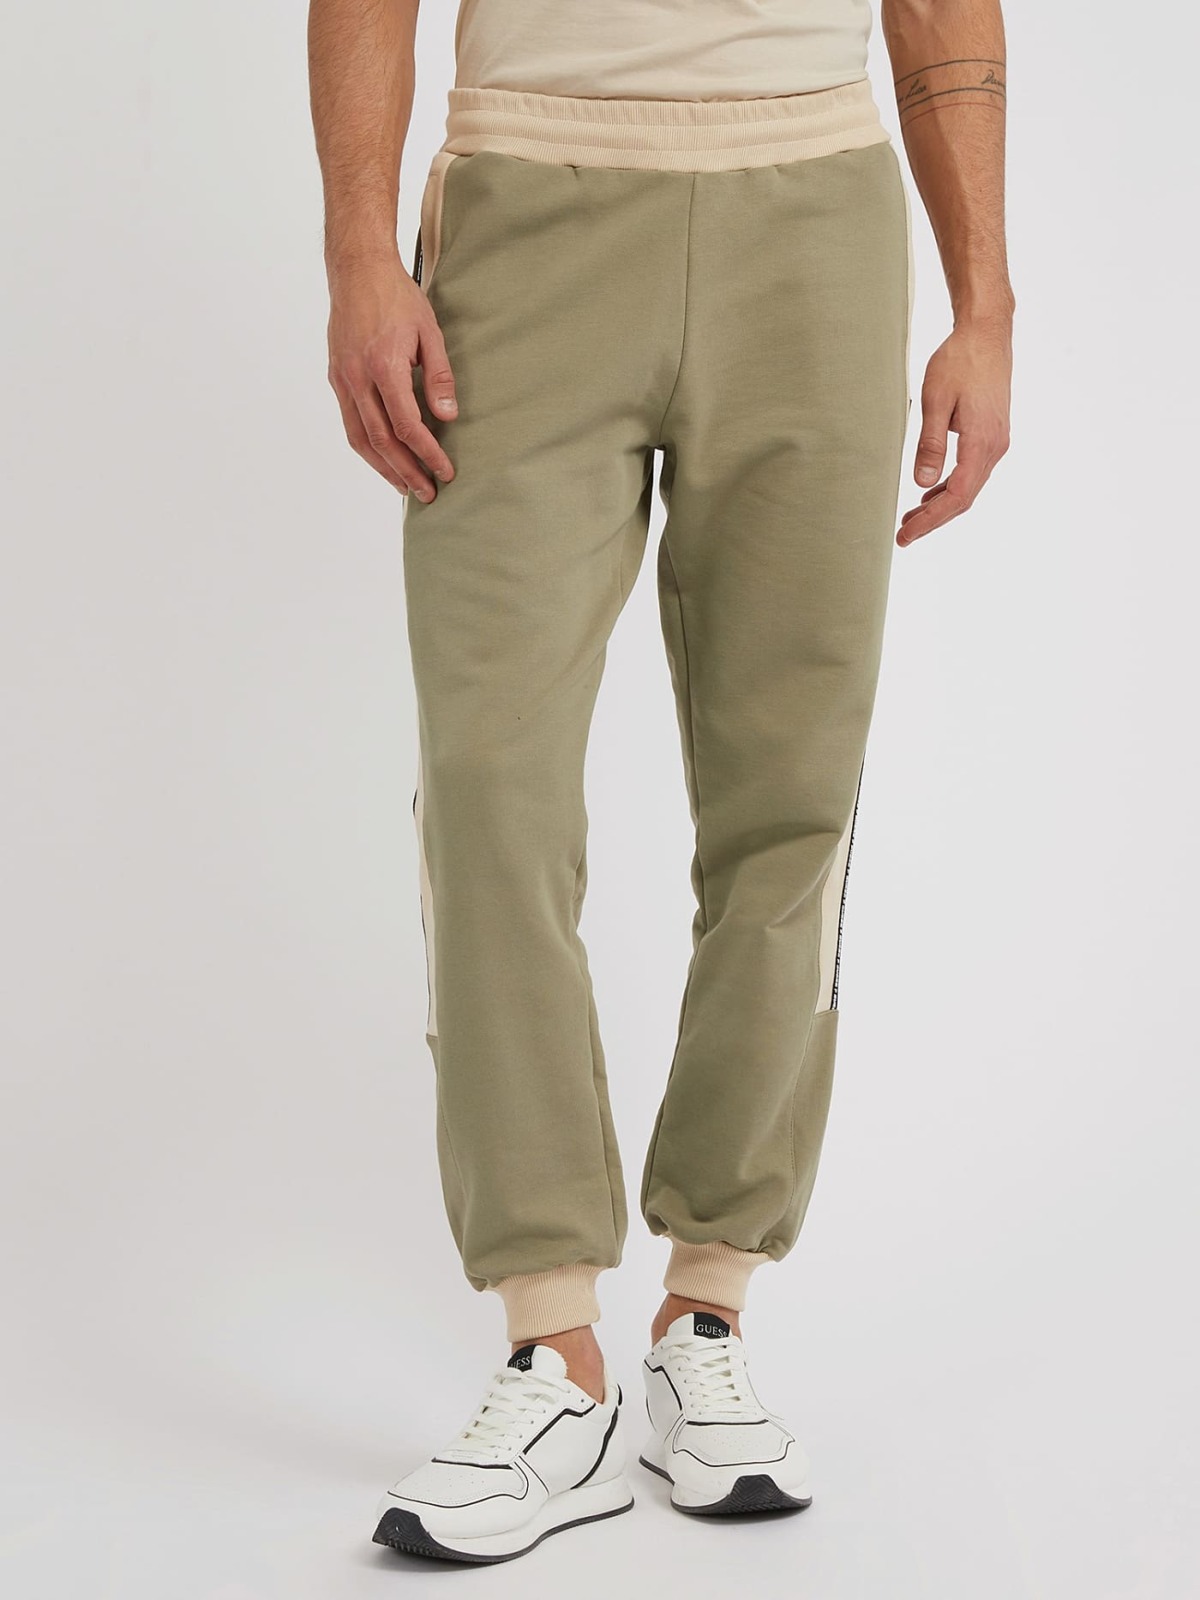 Gents Trousers Green at Guess GOOFASH